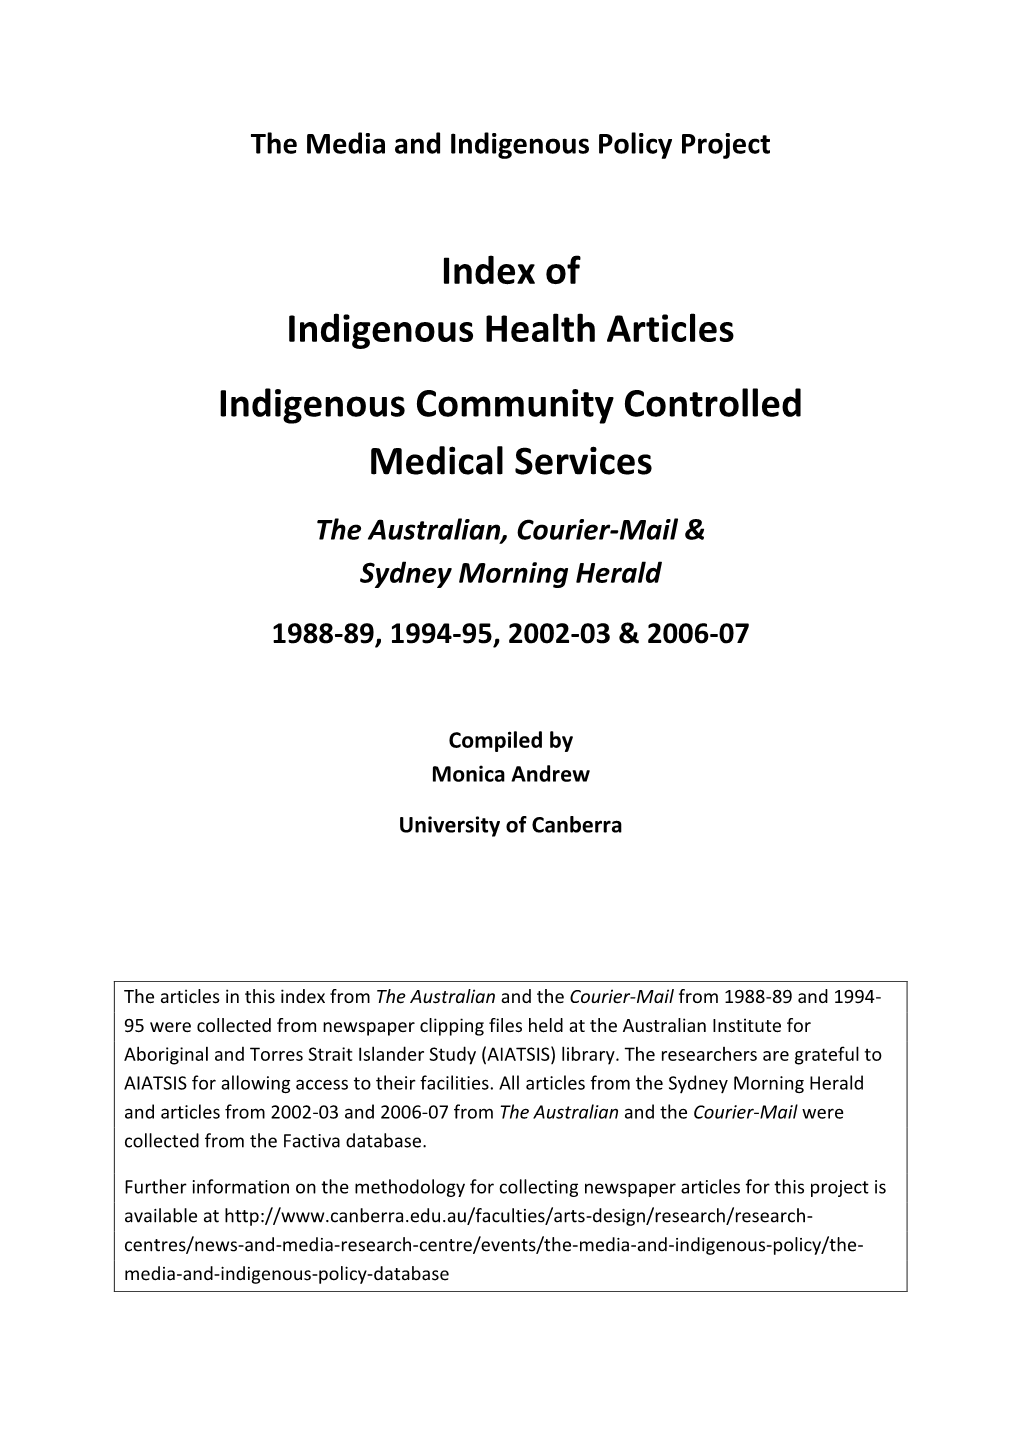 Indigenous Community Controlled Medical Services